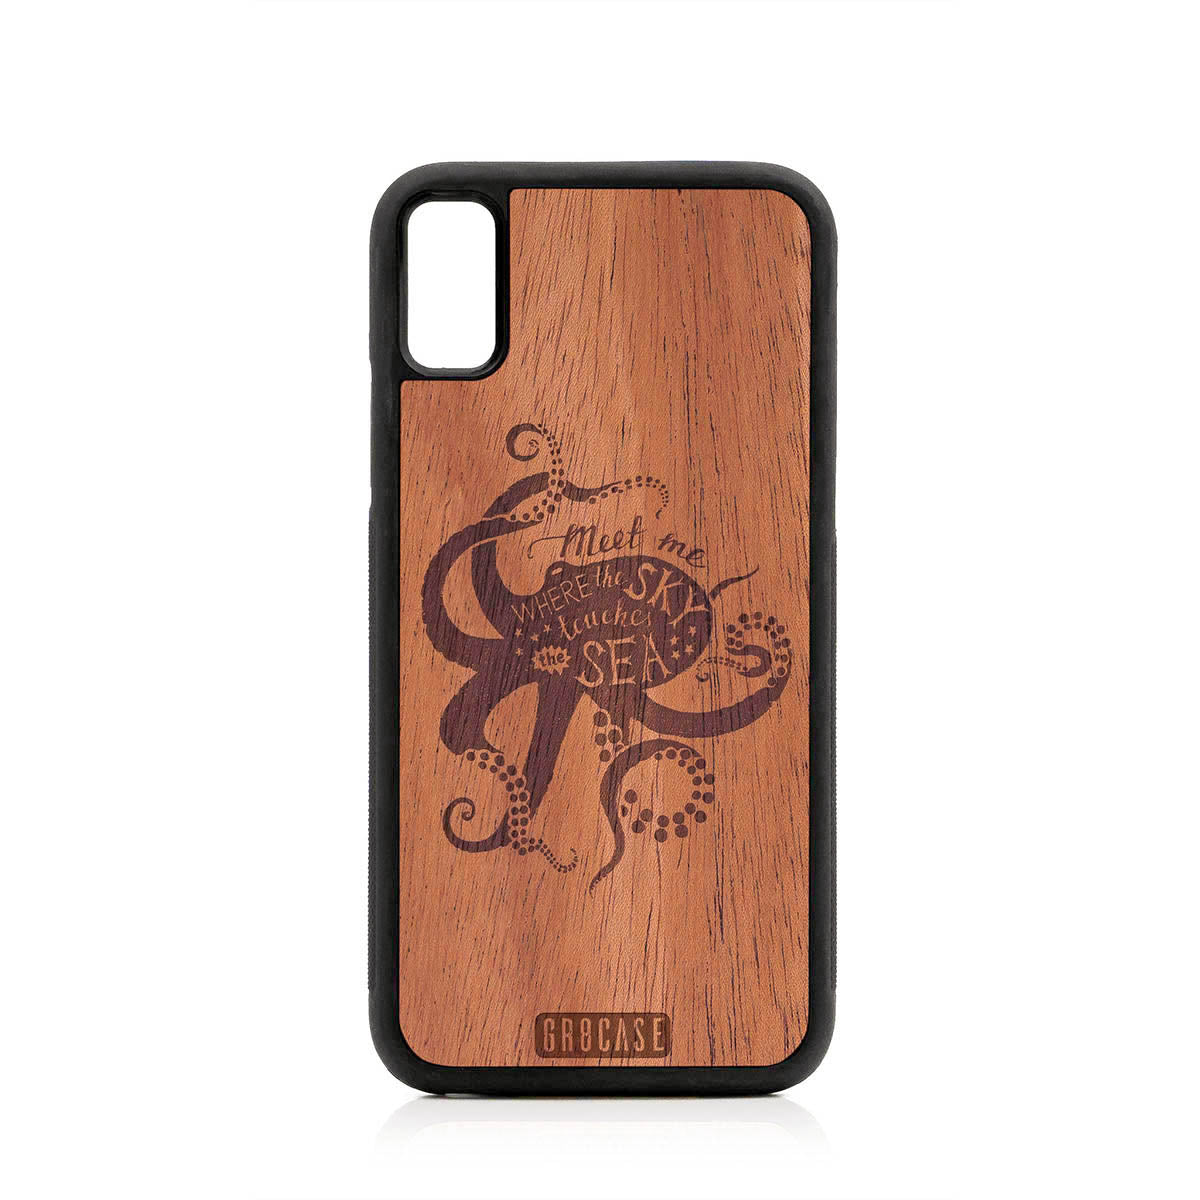 Meet Me Where The Sky Touches The Sea (Octopus) Design Wood Case For iPhone XS Max